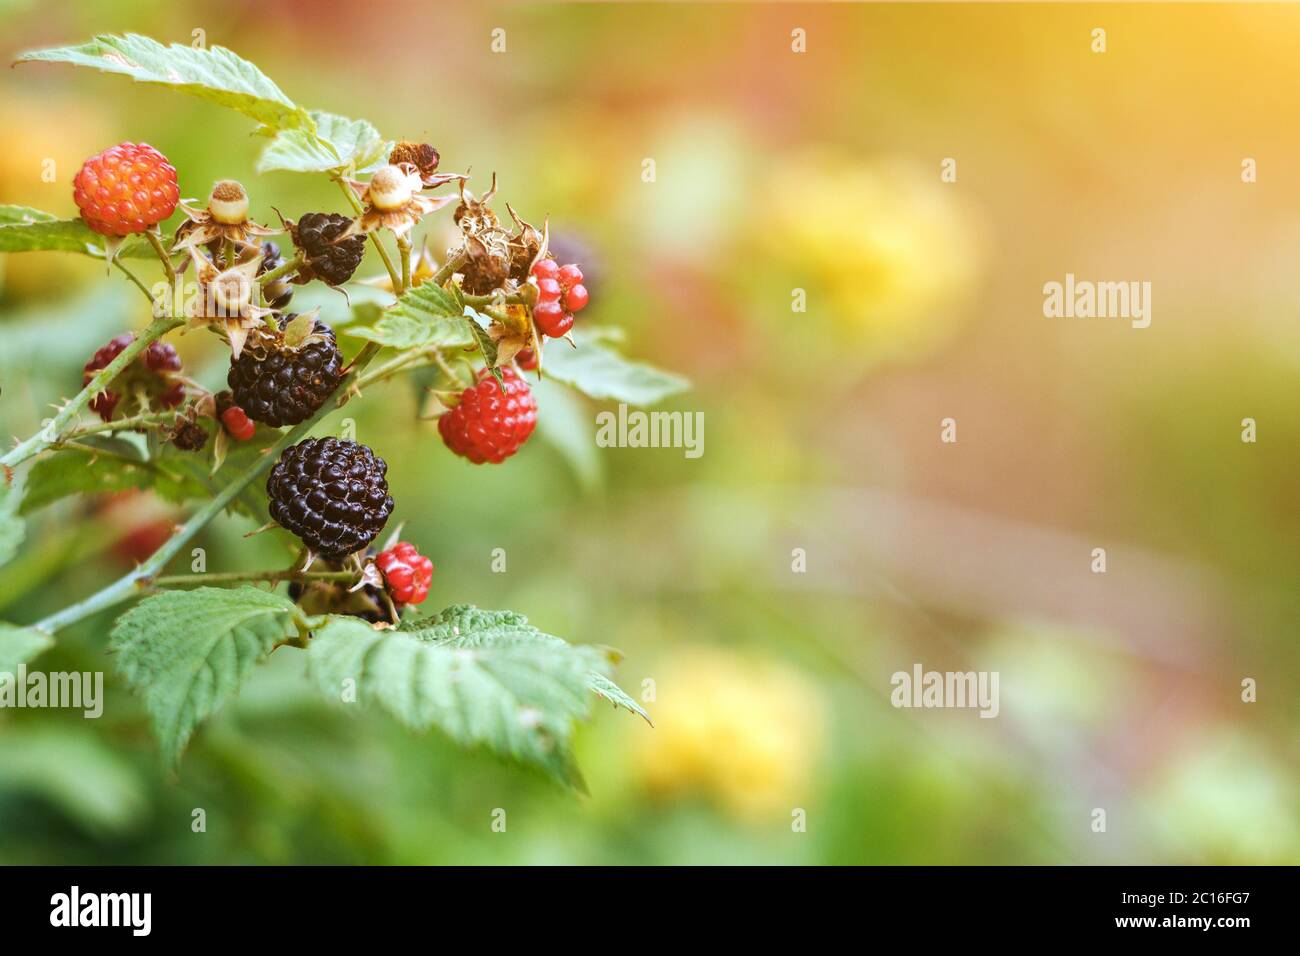 Blackberry branch with red and black berries, green leaves in the sunlight, copy space Stock Photo